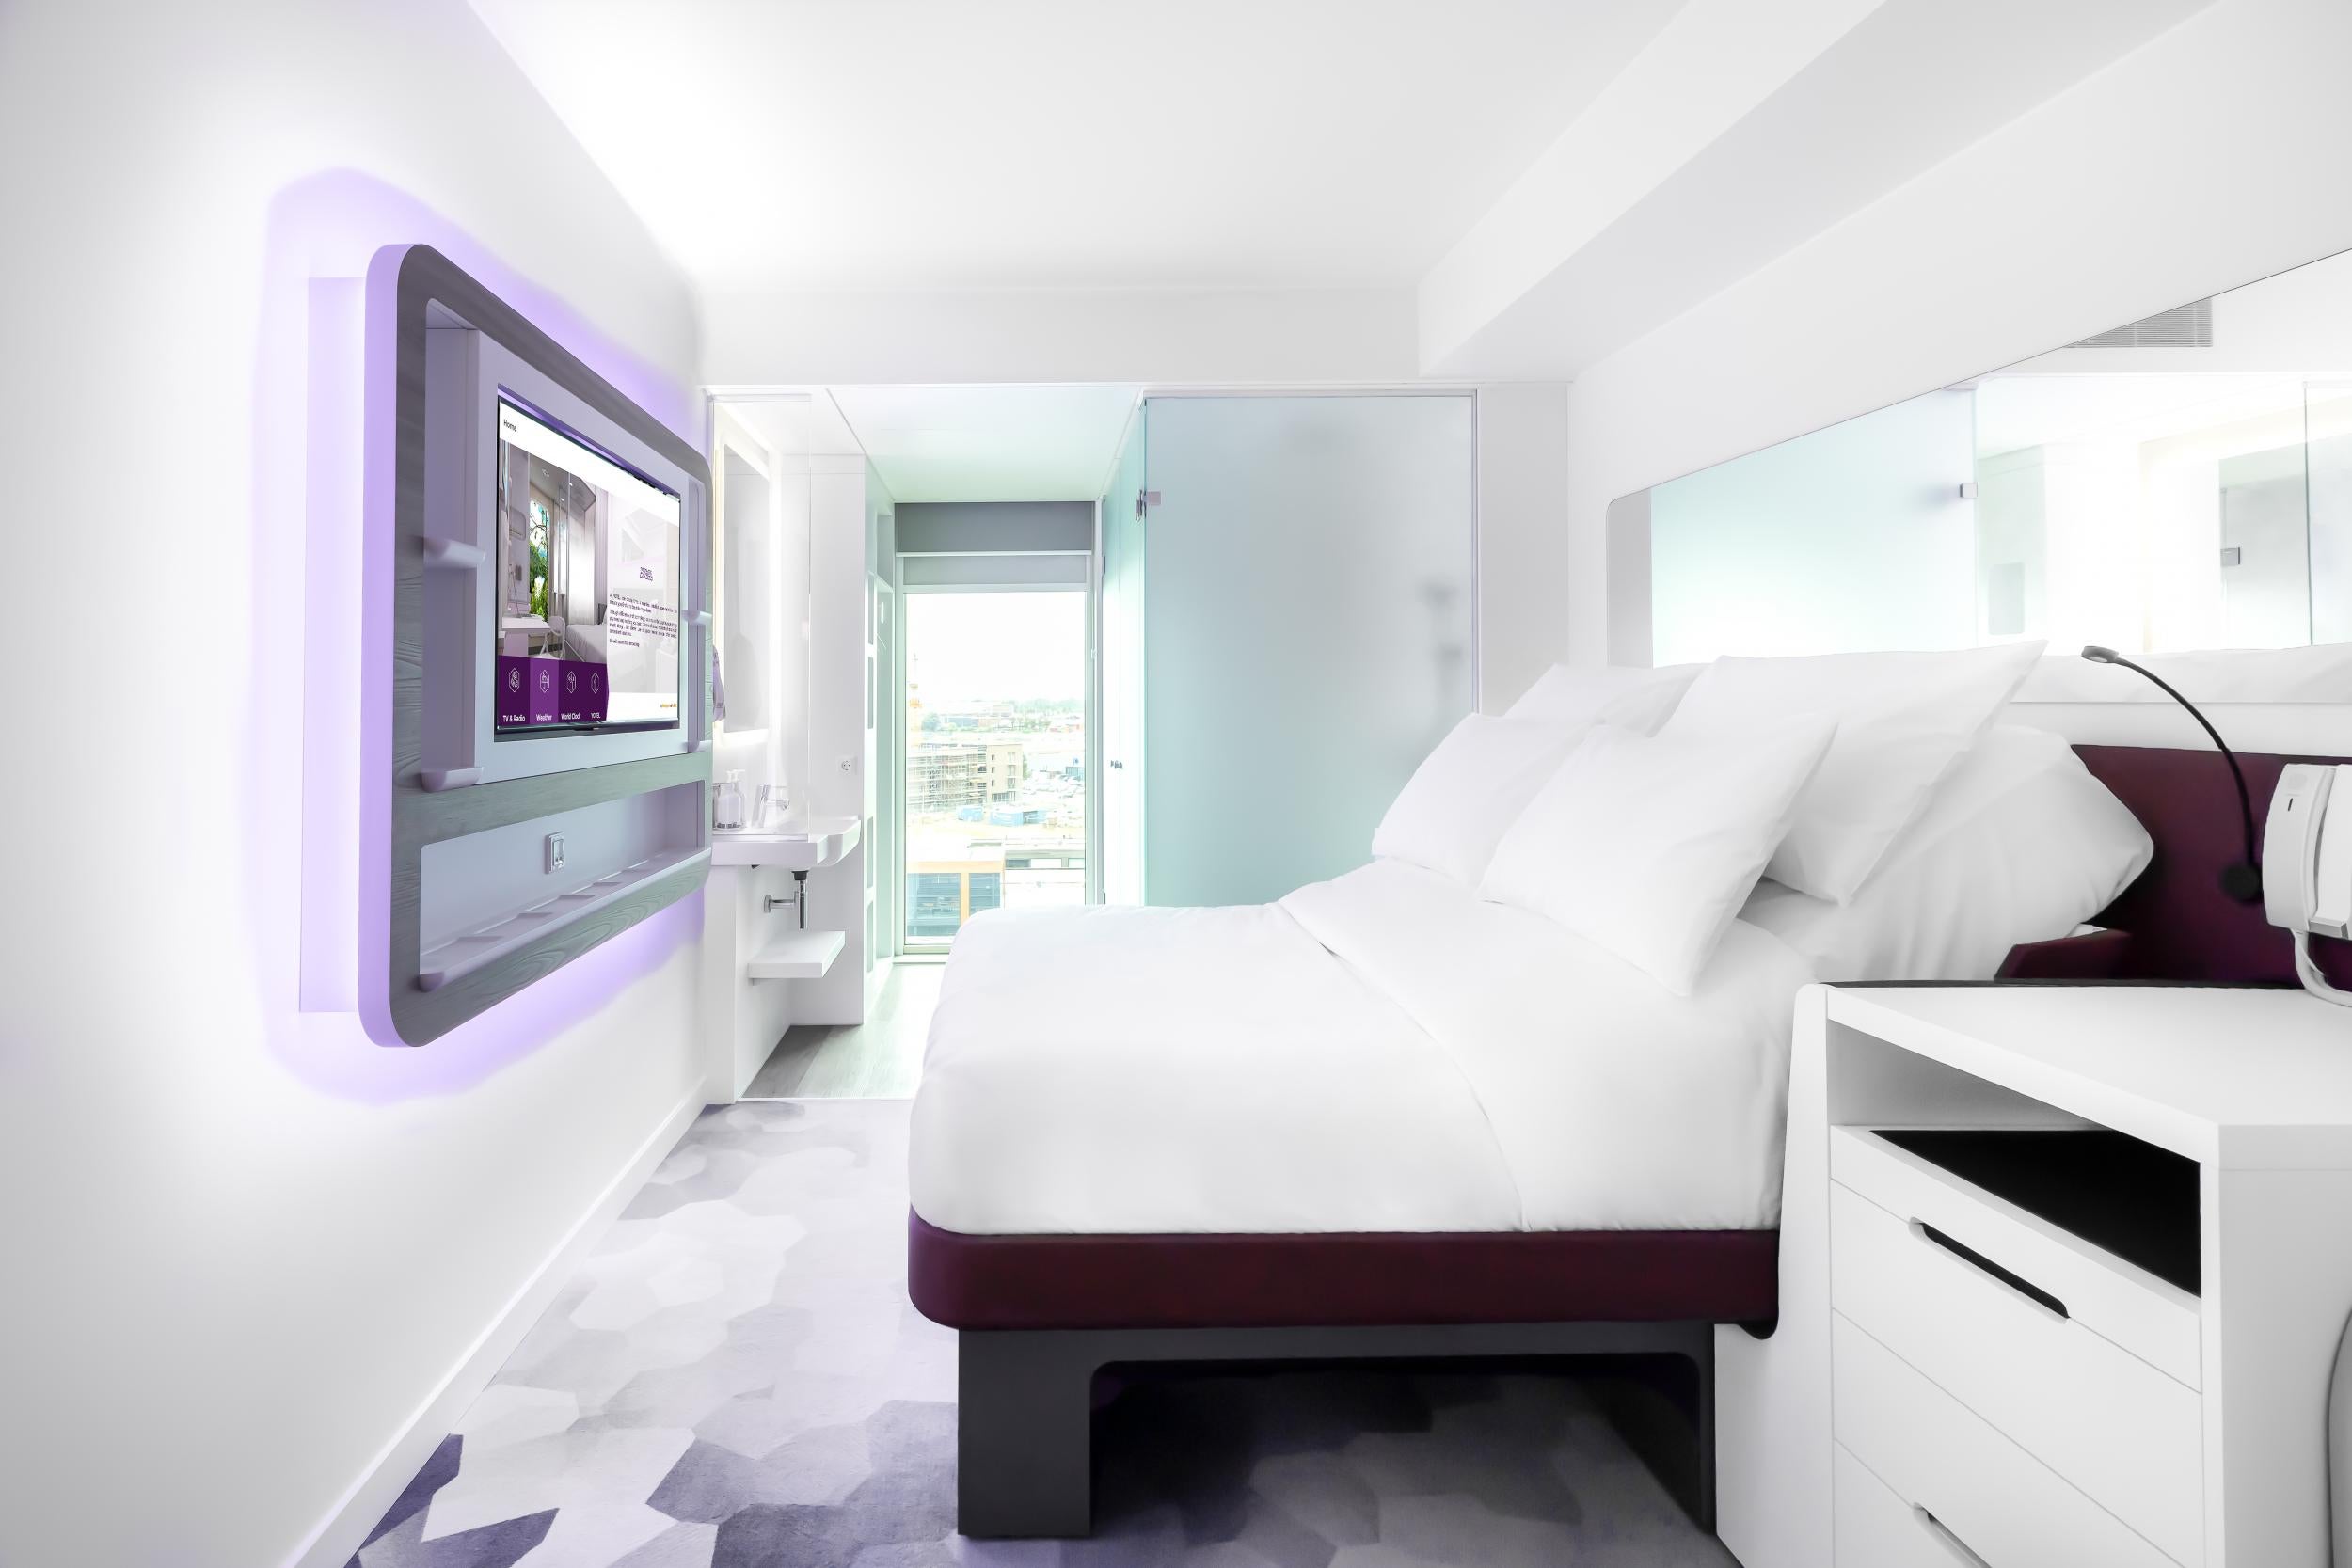 Yotel combines space saving with space-age style